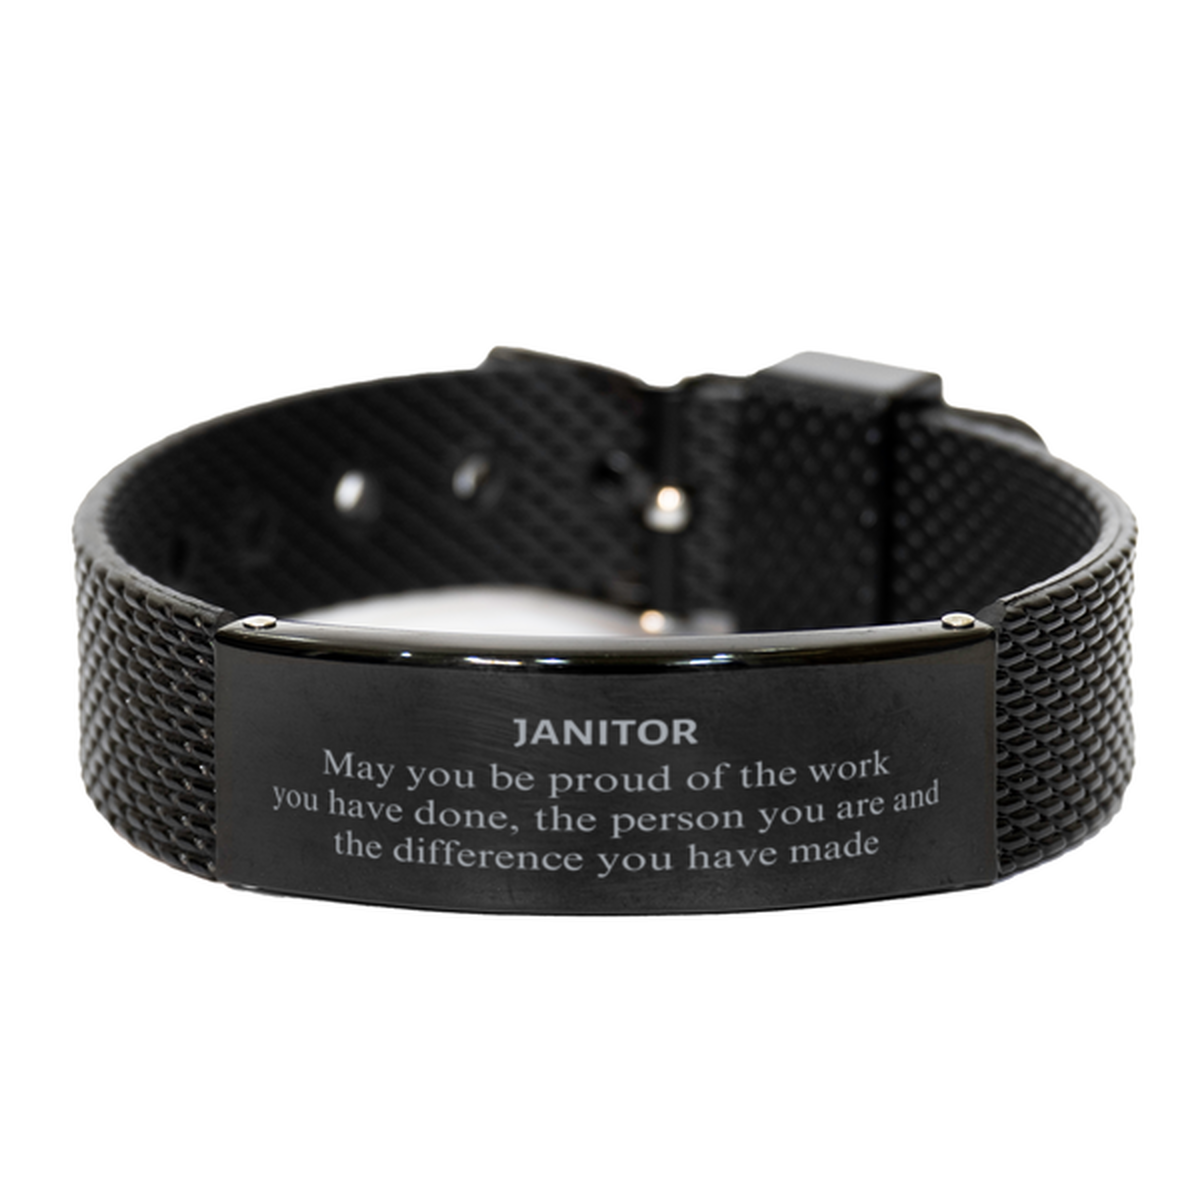 Janitor May you be proud of the work you have done, Retirement Janitor Black Shark Mesh Bracelet for Colleague Appreciation Gifts Amazing for Janitor